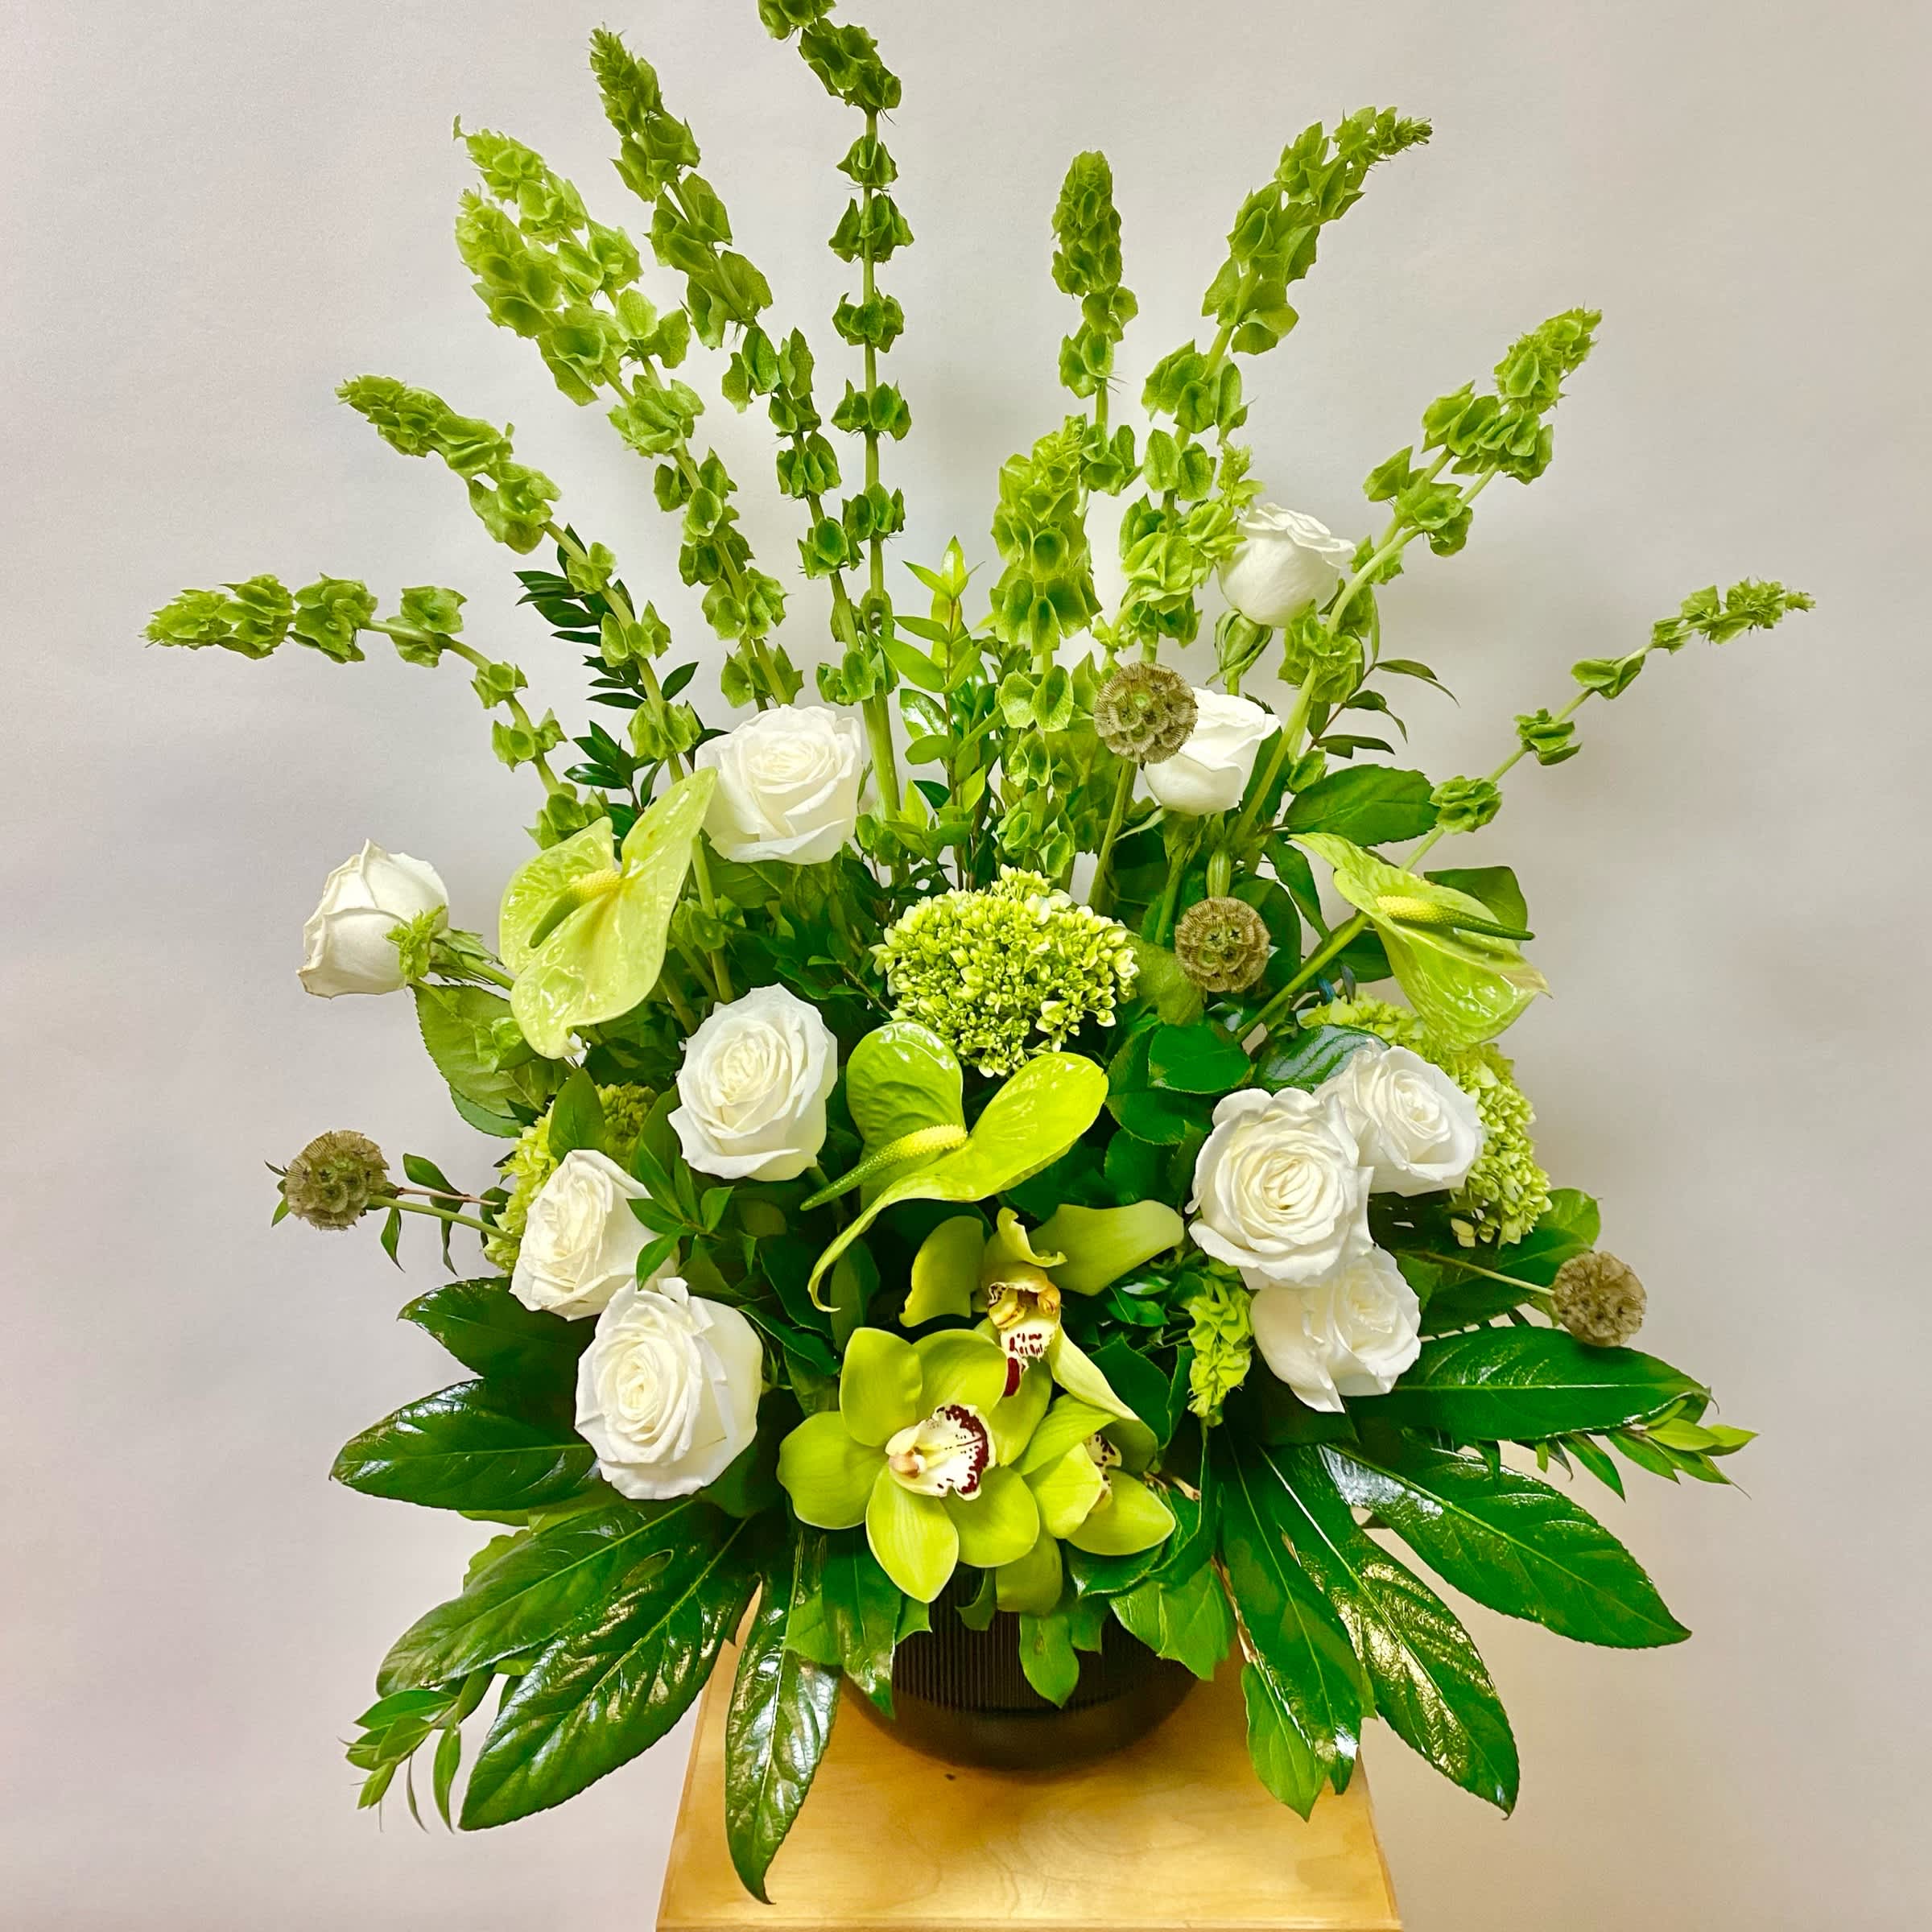 Eternal Affection Arrangement - This all White and Green Funeral Arrangement includes White Roses, Green or White Anthurium, Bells of Ireland, Green Hydrangea's, Green Cymbidium Orchids, Scabiosa Pods or Yellow Billy Balls and Aralia Leaves. Or as Similar as Possible. 